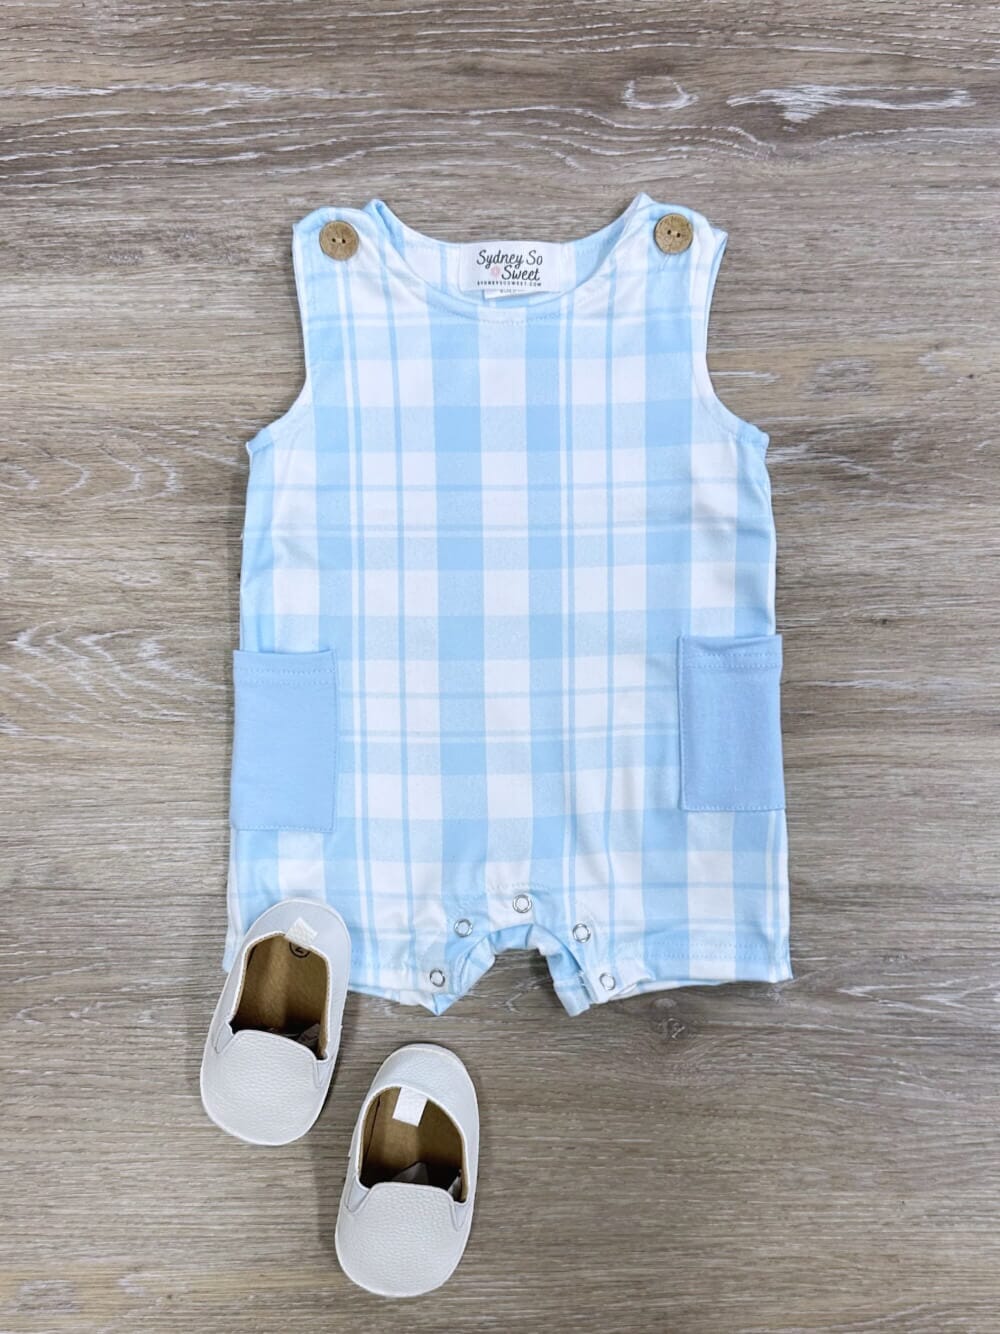 Spring Blue Plaid Boys Baby Jumper Outfit - Sydney So Sweet